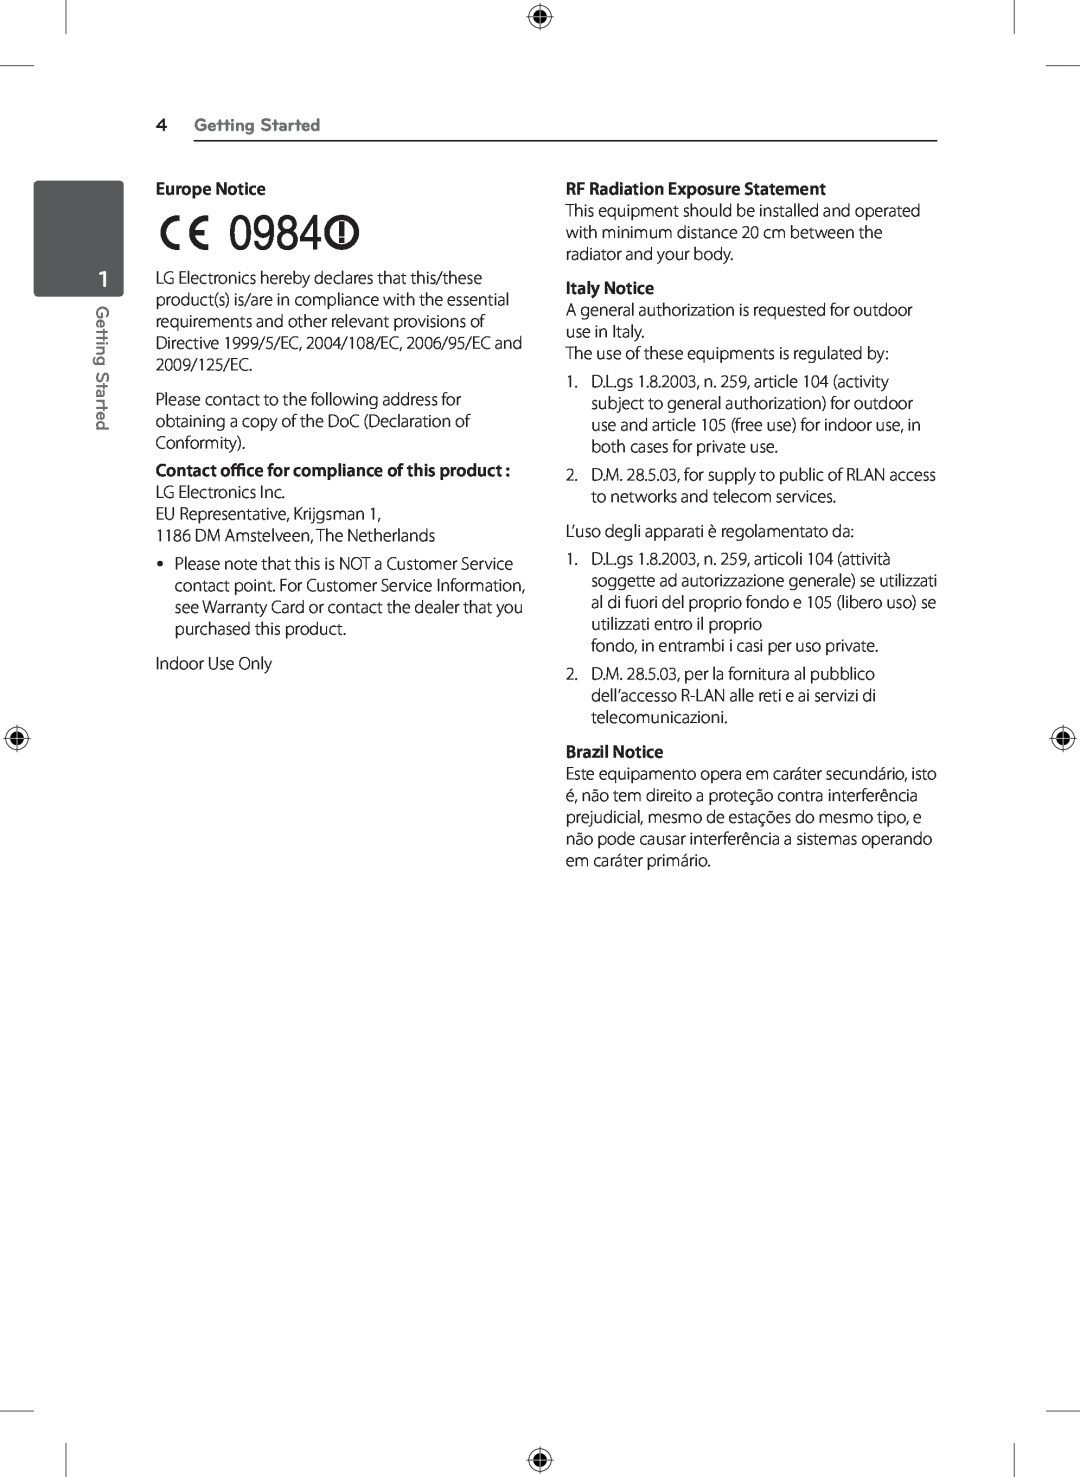 LG Electronics S43A1-D Europe Notice, RF Radiation Exposure Statement, Italy Notice, Brazil Notice, Getting Started 